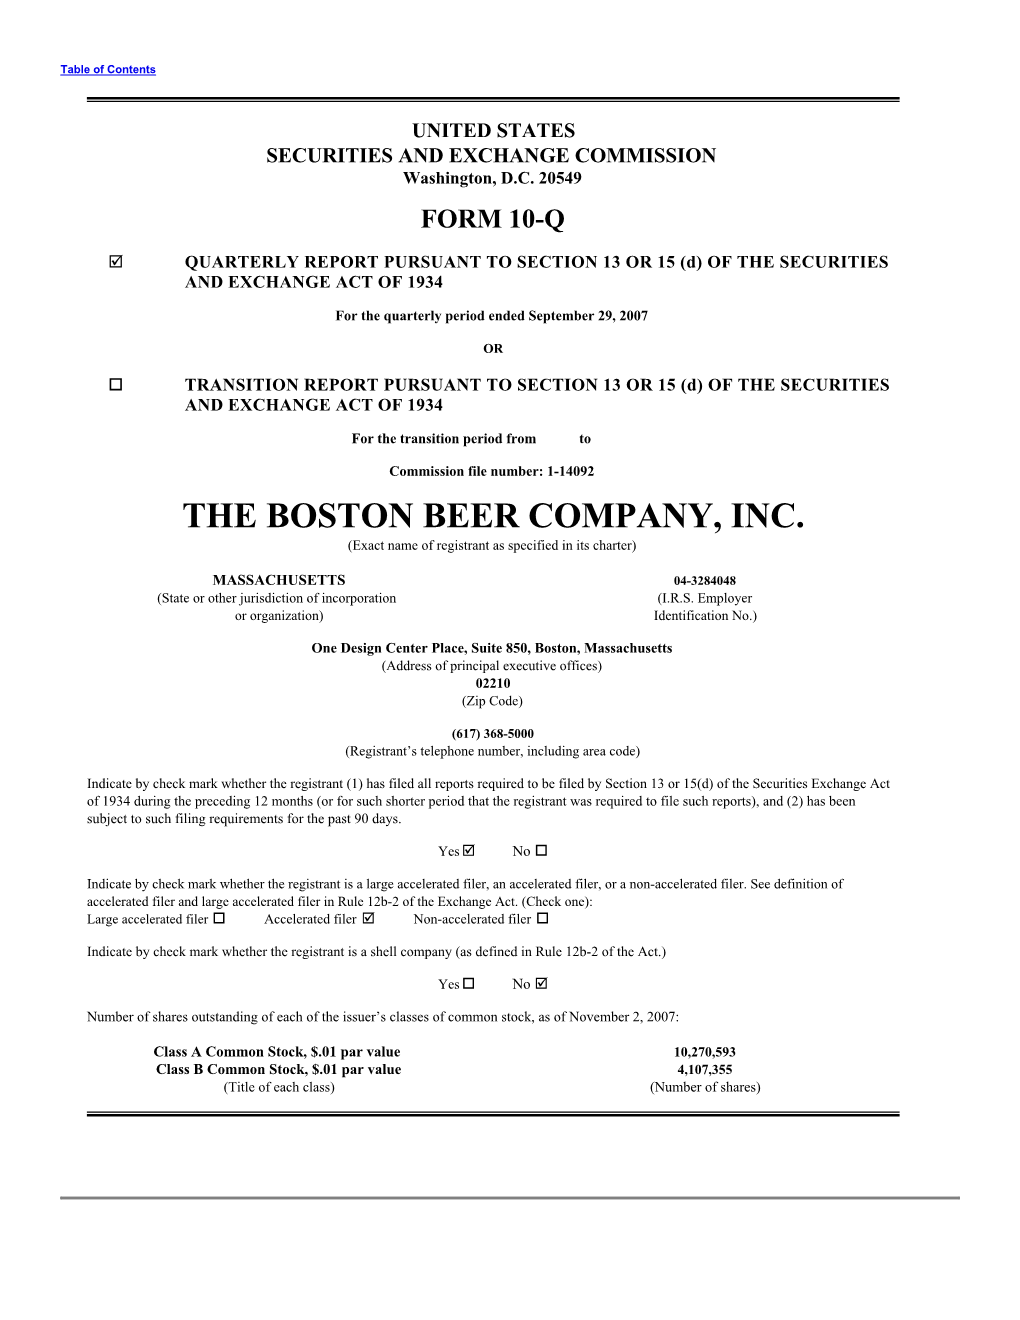 THE BOSTON BEER COMPANY, INC. (Exact Name of Registrant As Specified in Its Charter)